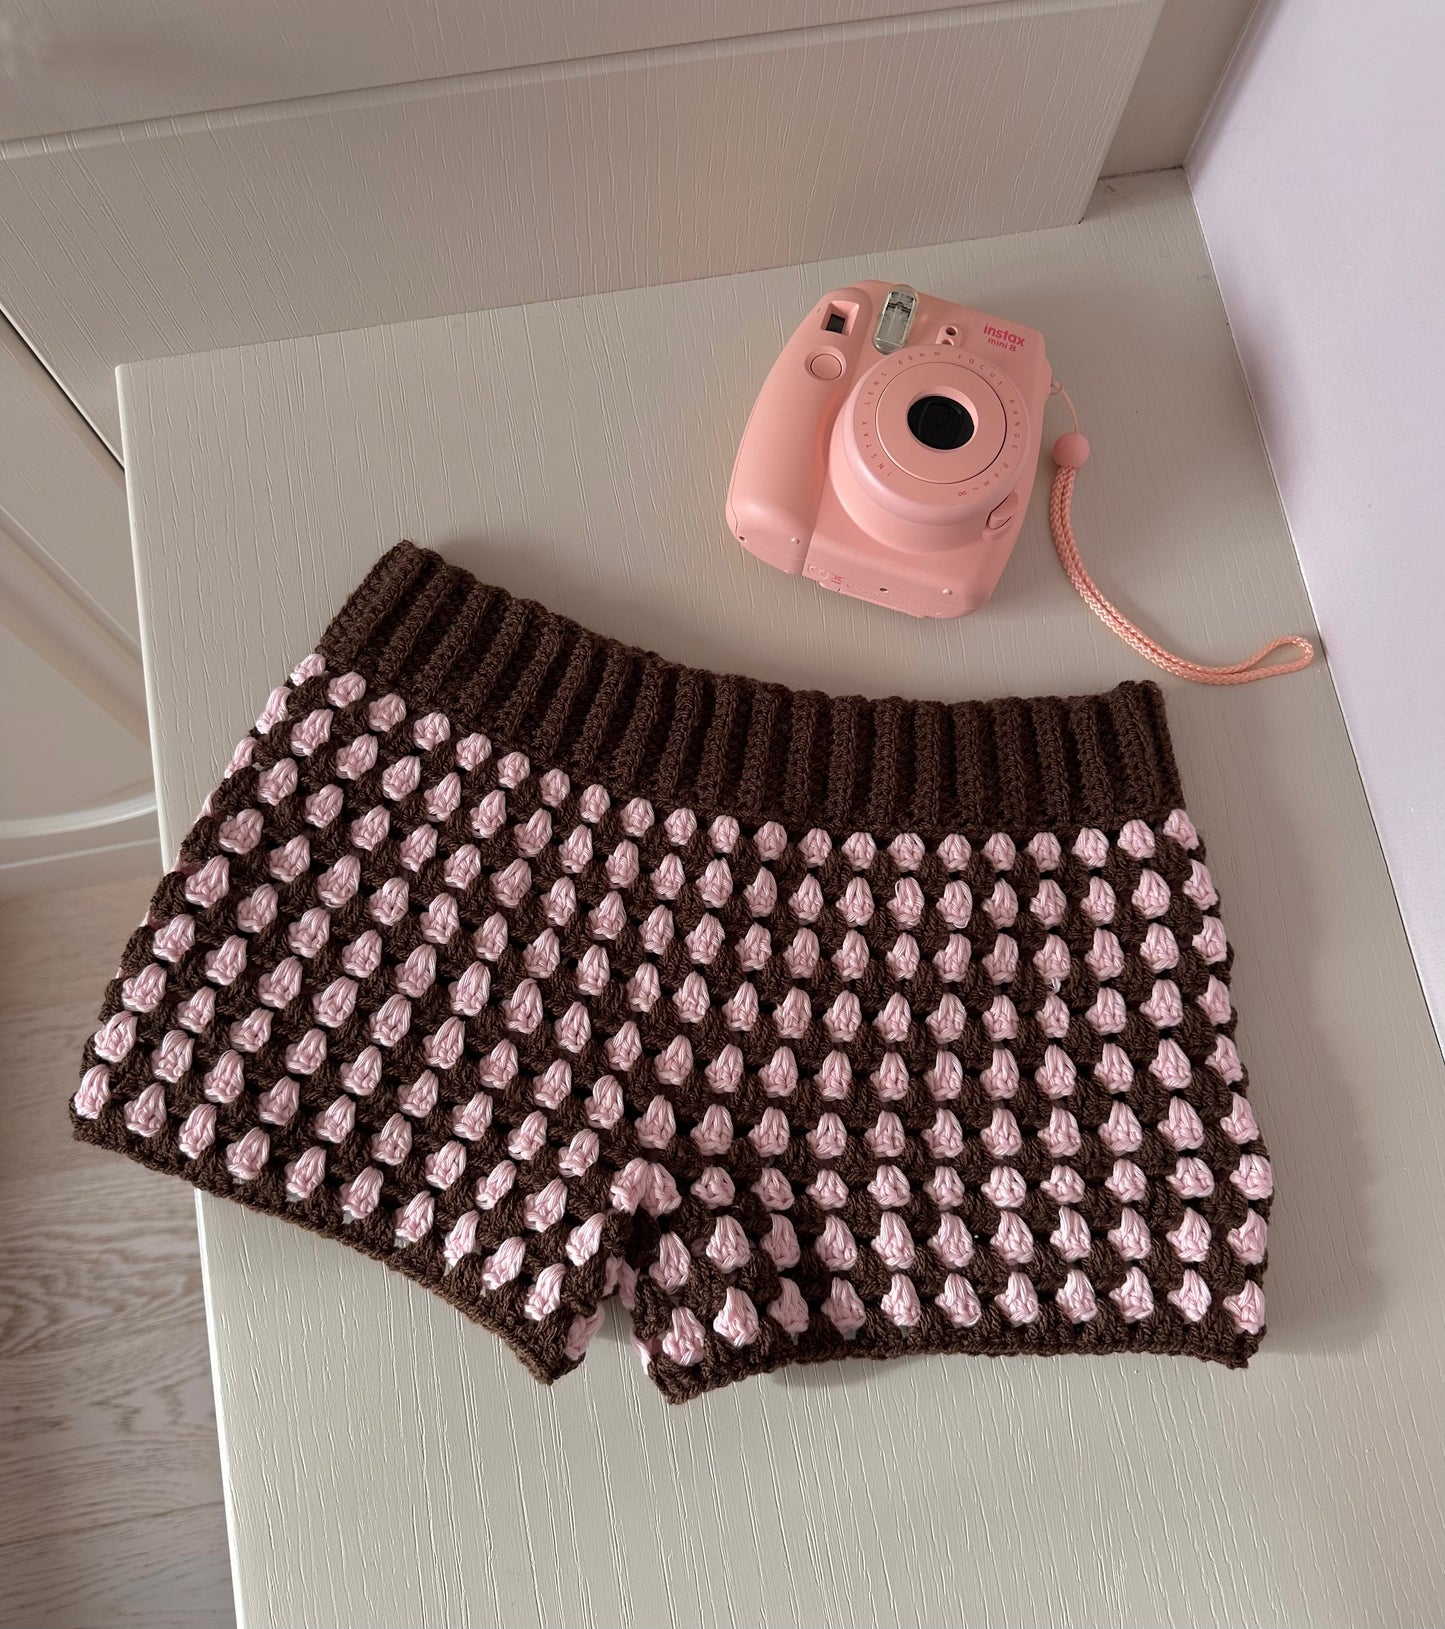 Handmade gingham crochet shorts in brown and pink